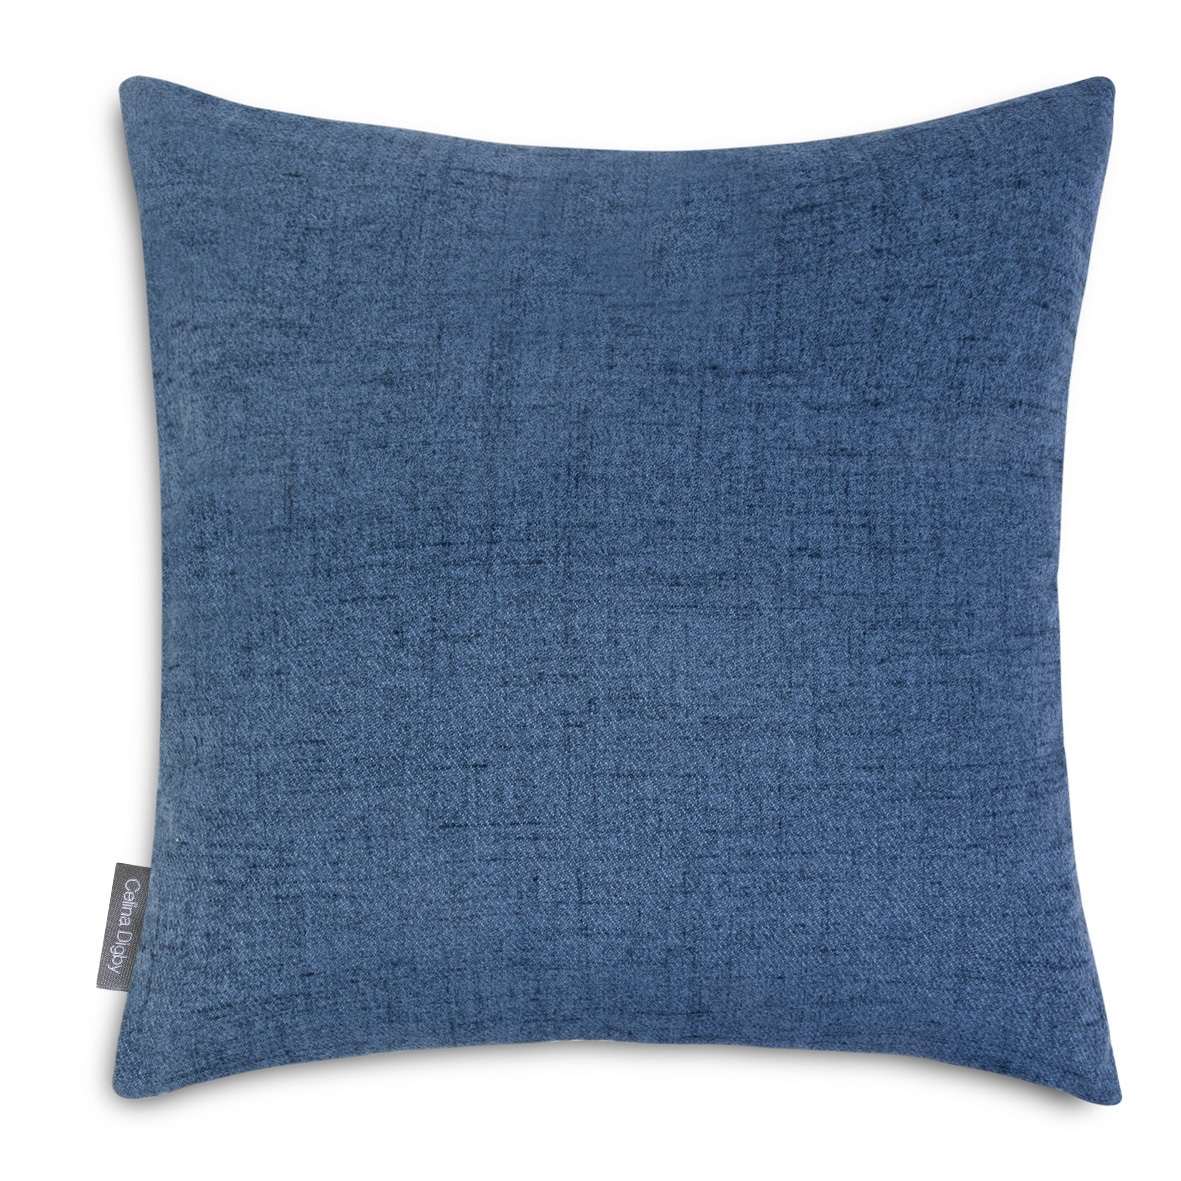 Celina Digby Luxury Wool Effect Cushion – Denim Blue (Available in 2 Sizes) Extra Large (55x55cm) Hollow Fibre Filling